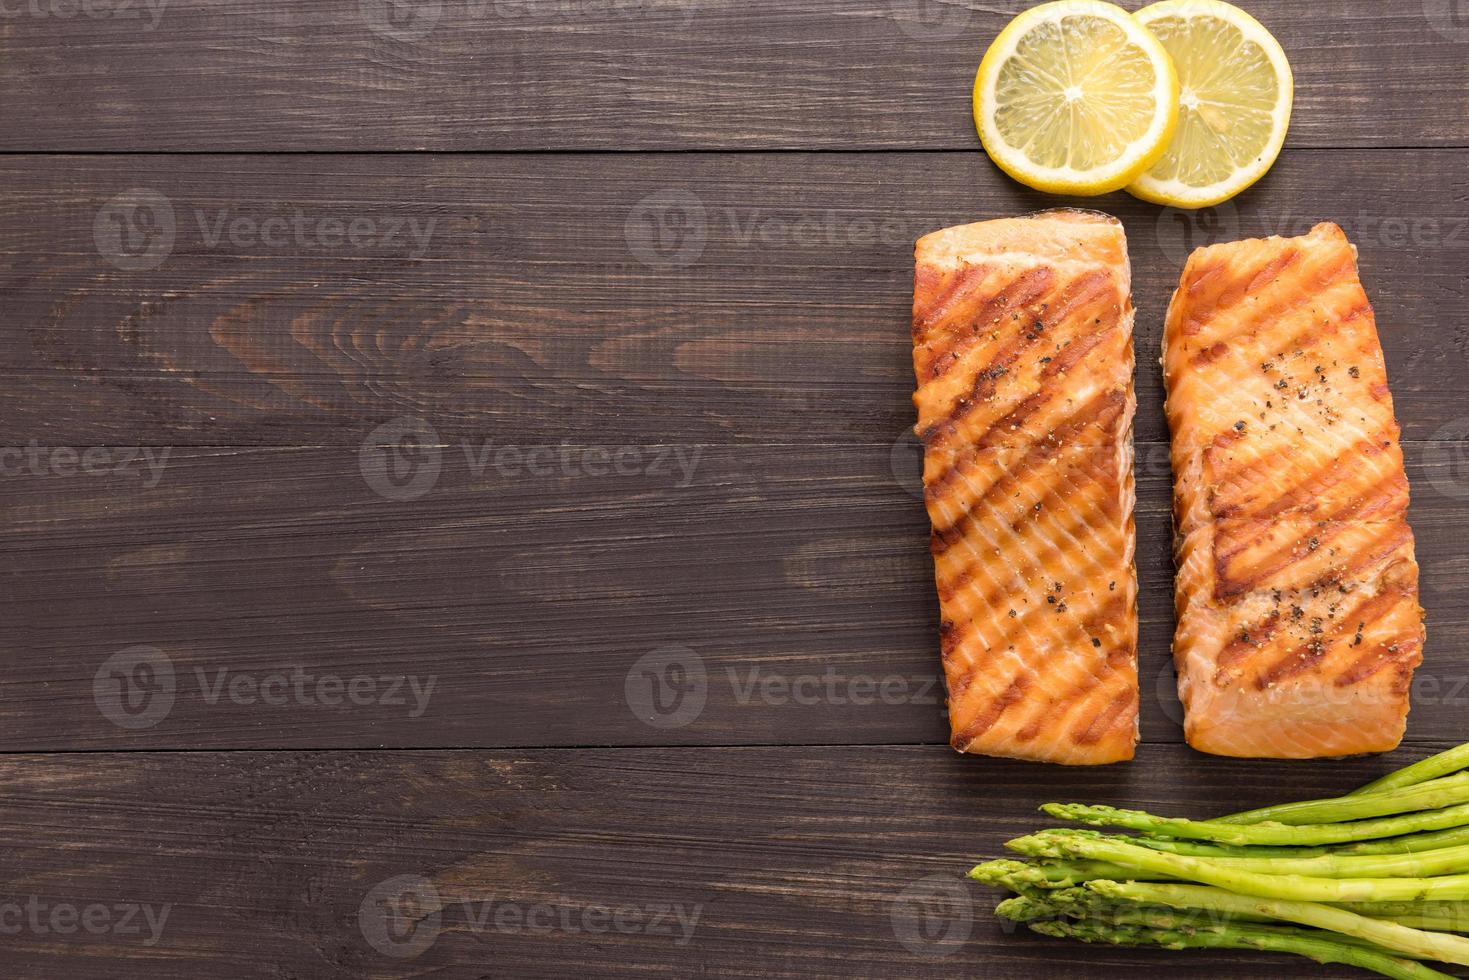 Grilled salmon with lemon, asparagus on wooden background photo